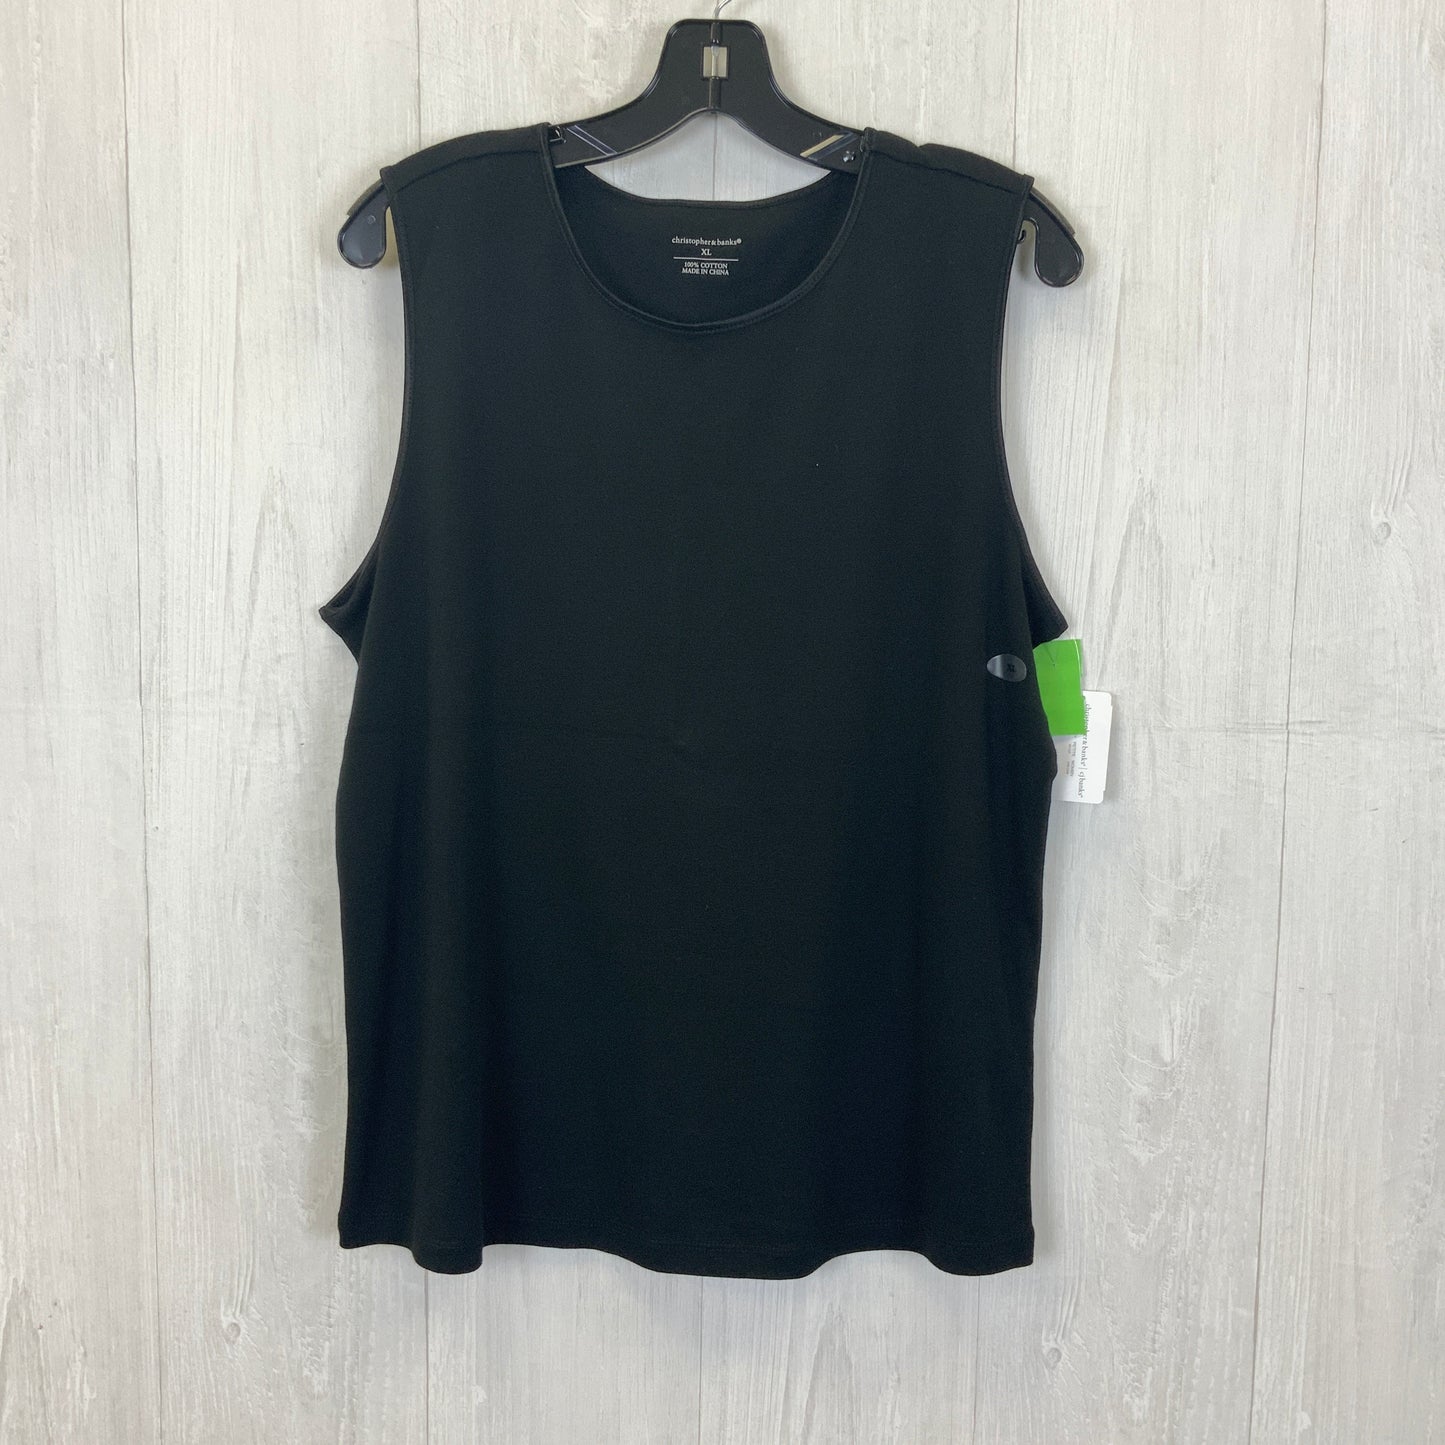 Black Tank Top Christopher And Banks, Size Xl